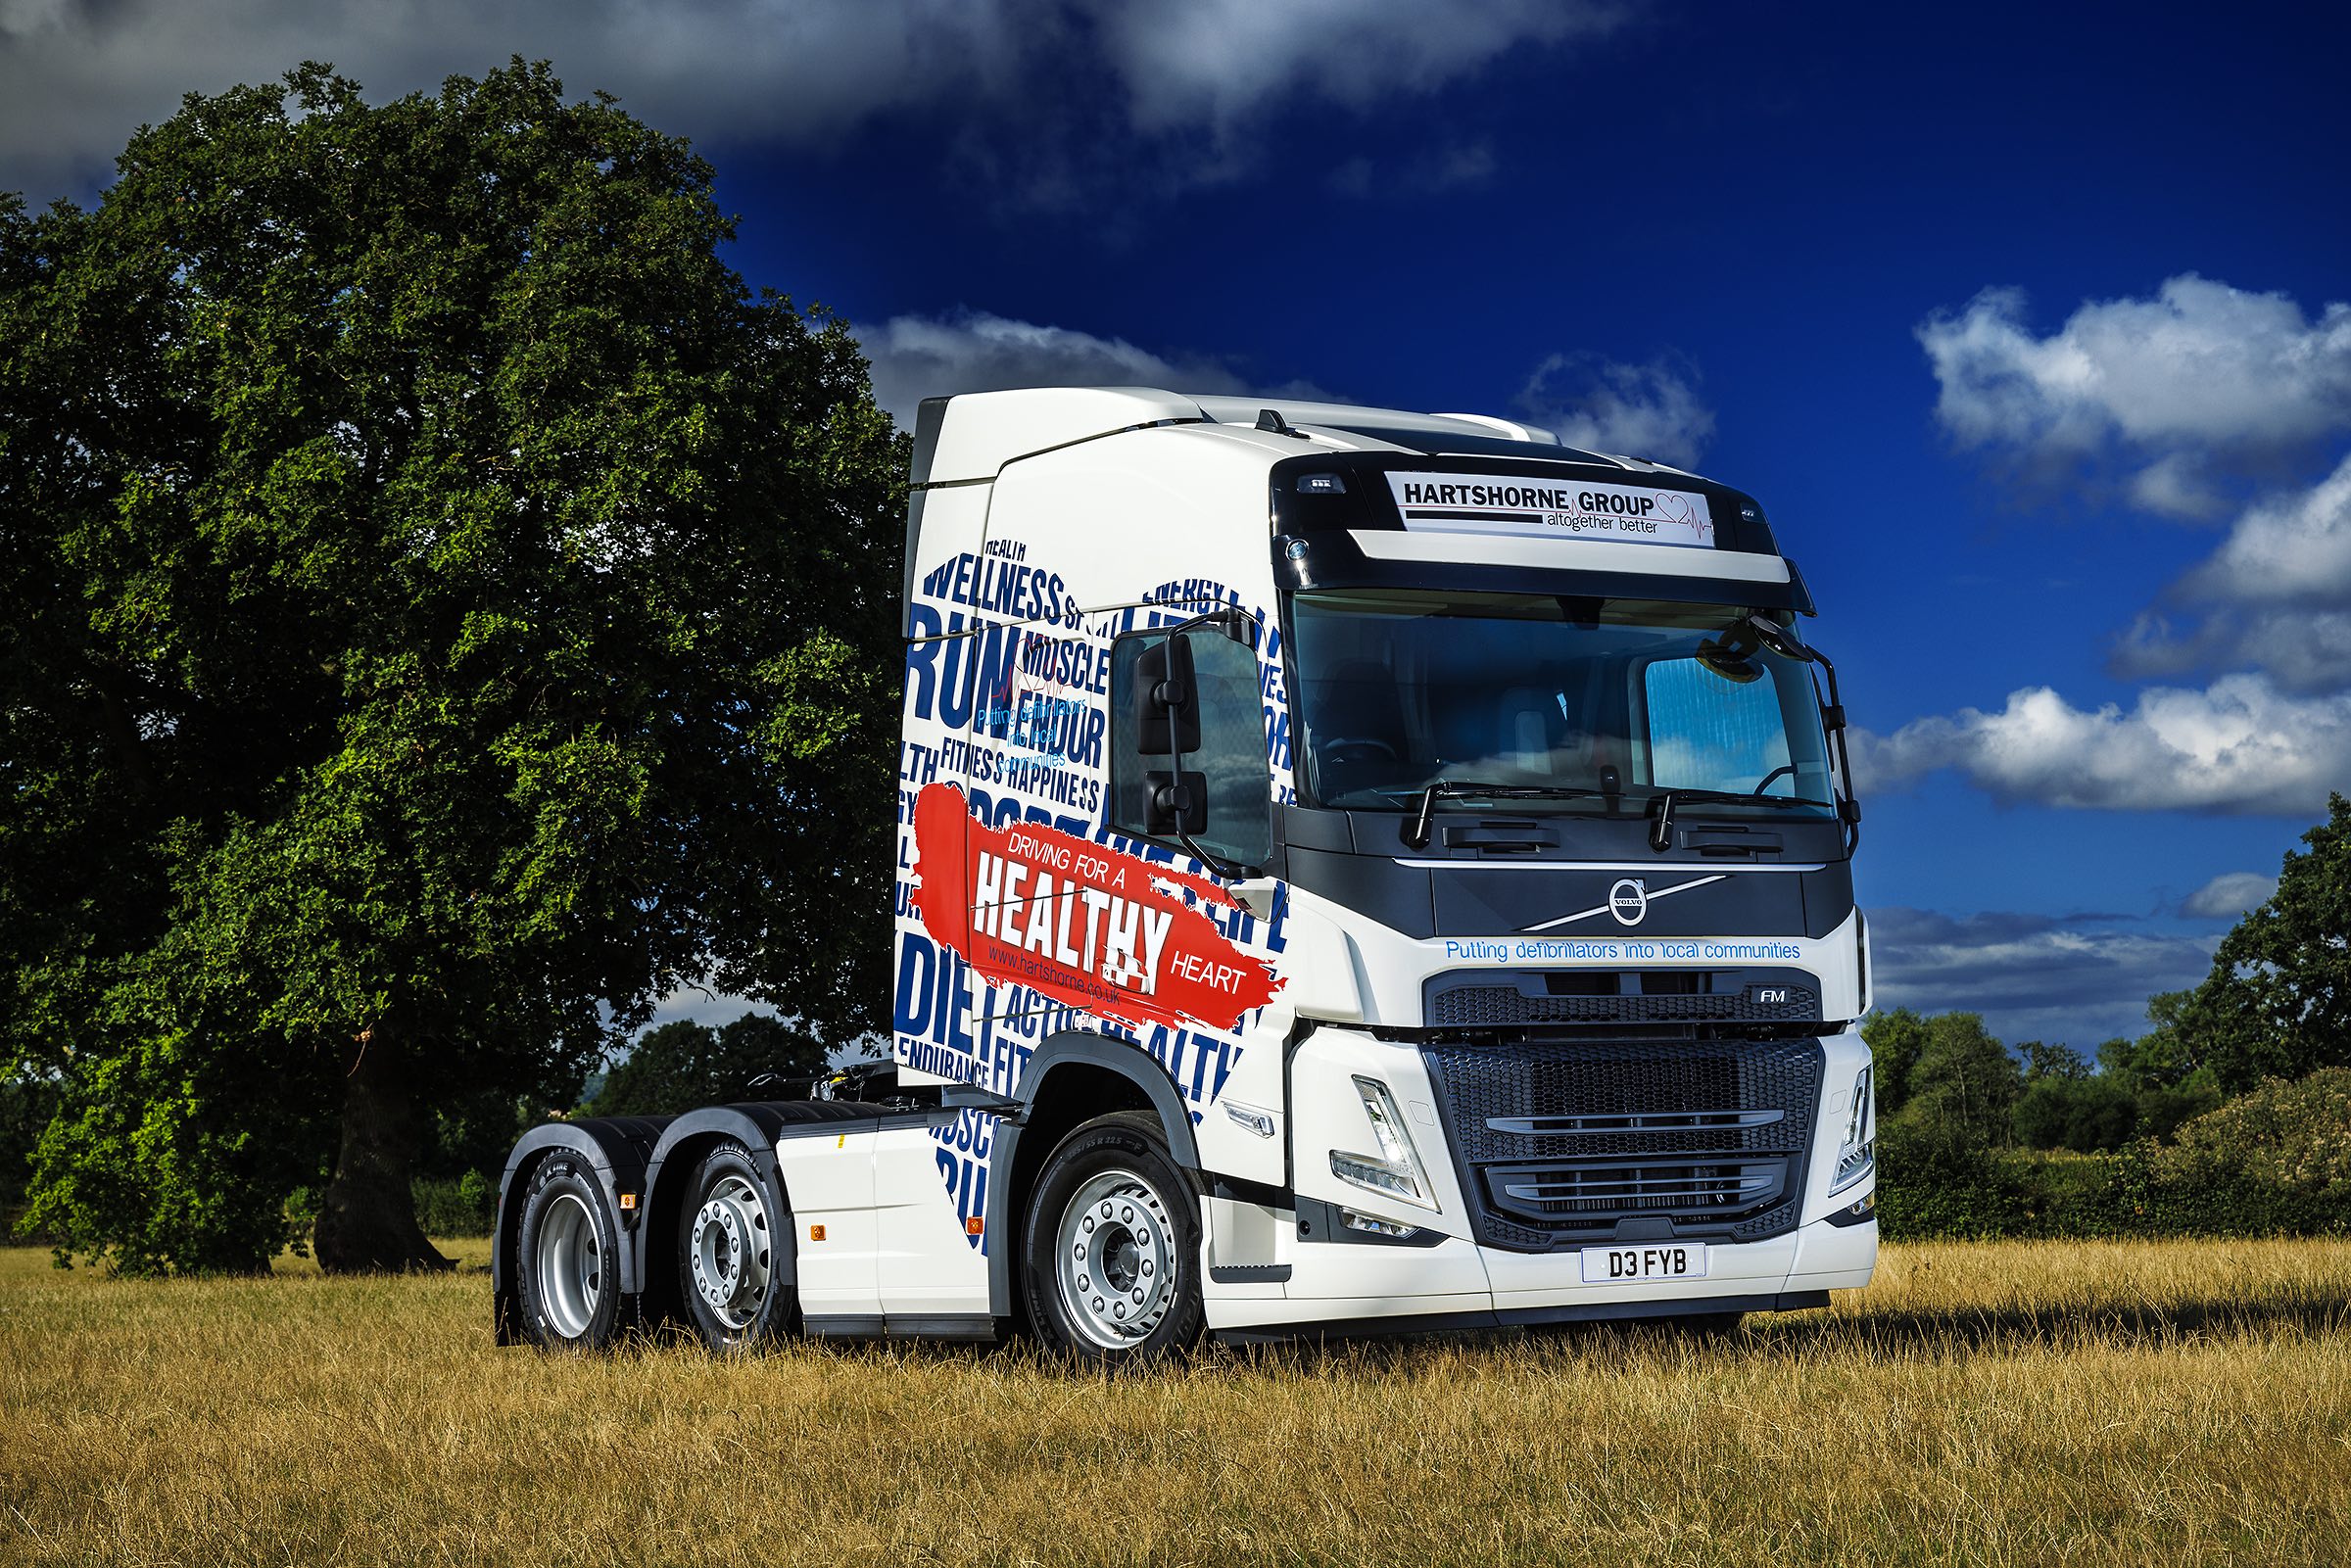 The new demonstrator truck is a state of the art Volvo FM460 with special registration plate D3 FYB (as in 'defib'). The truck is available to Hartshorne customers when they make a donation to the campaign. 